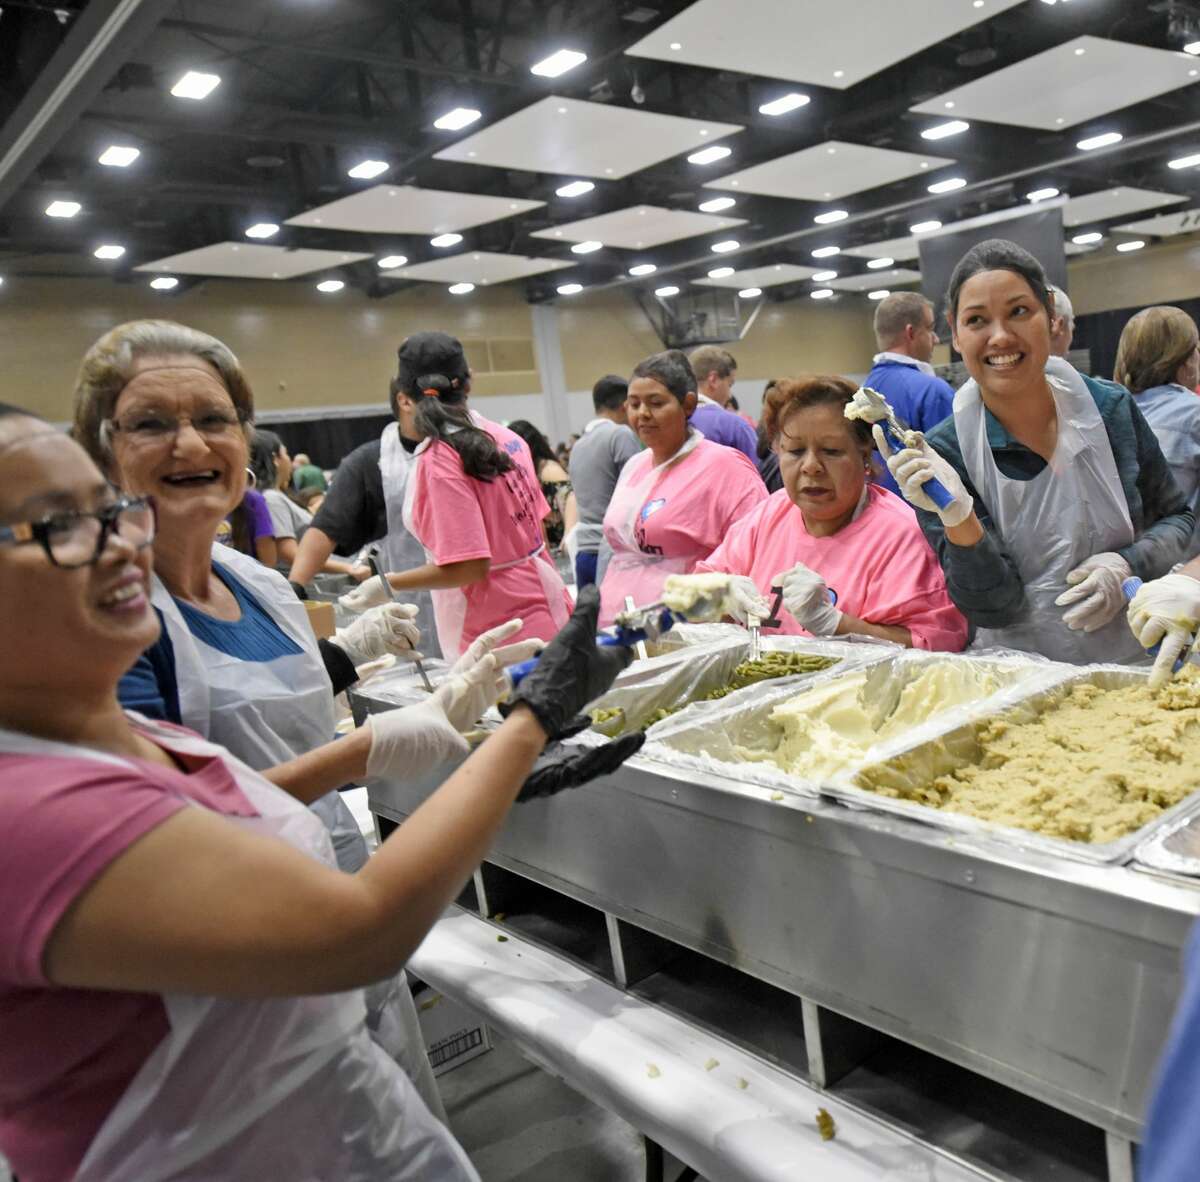 HEB Feast of Sharing to distribute holiday meals